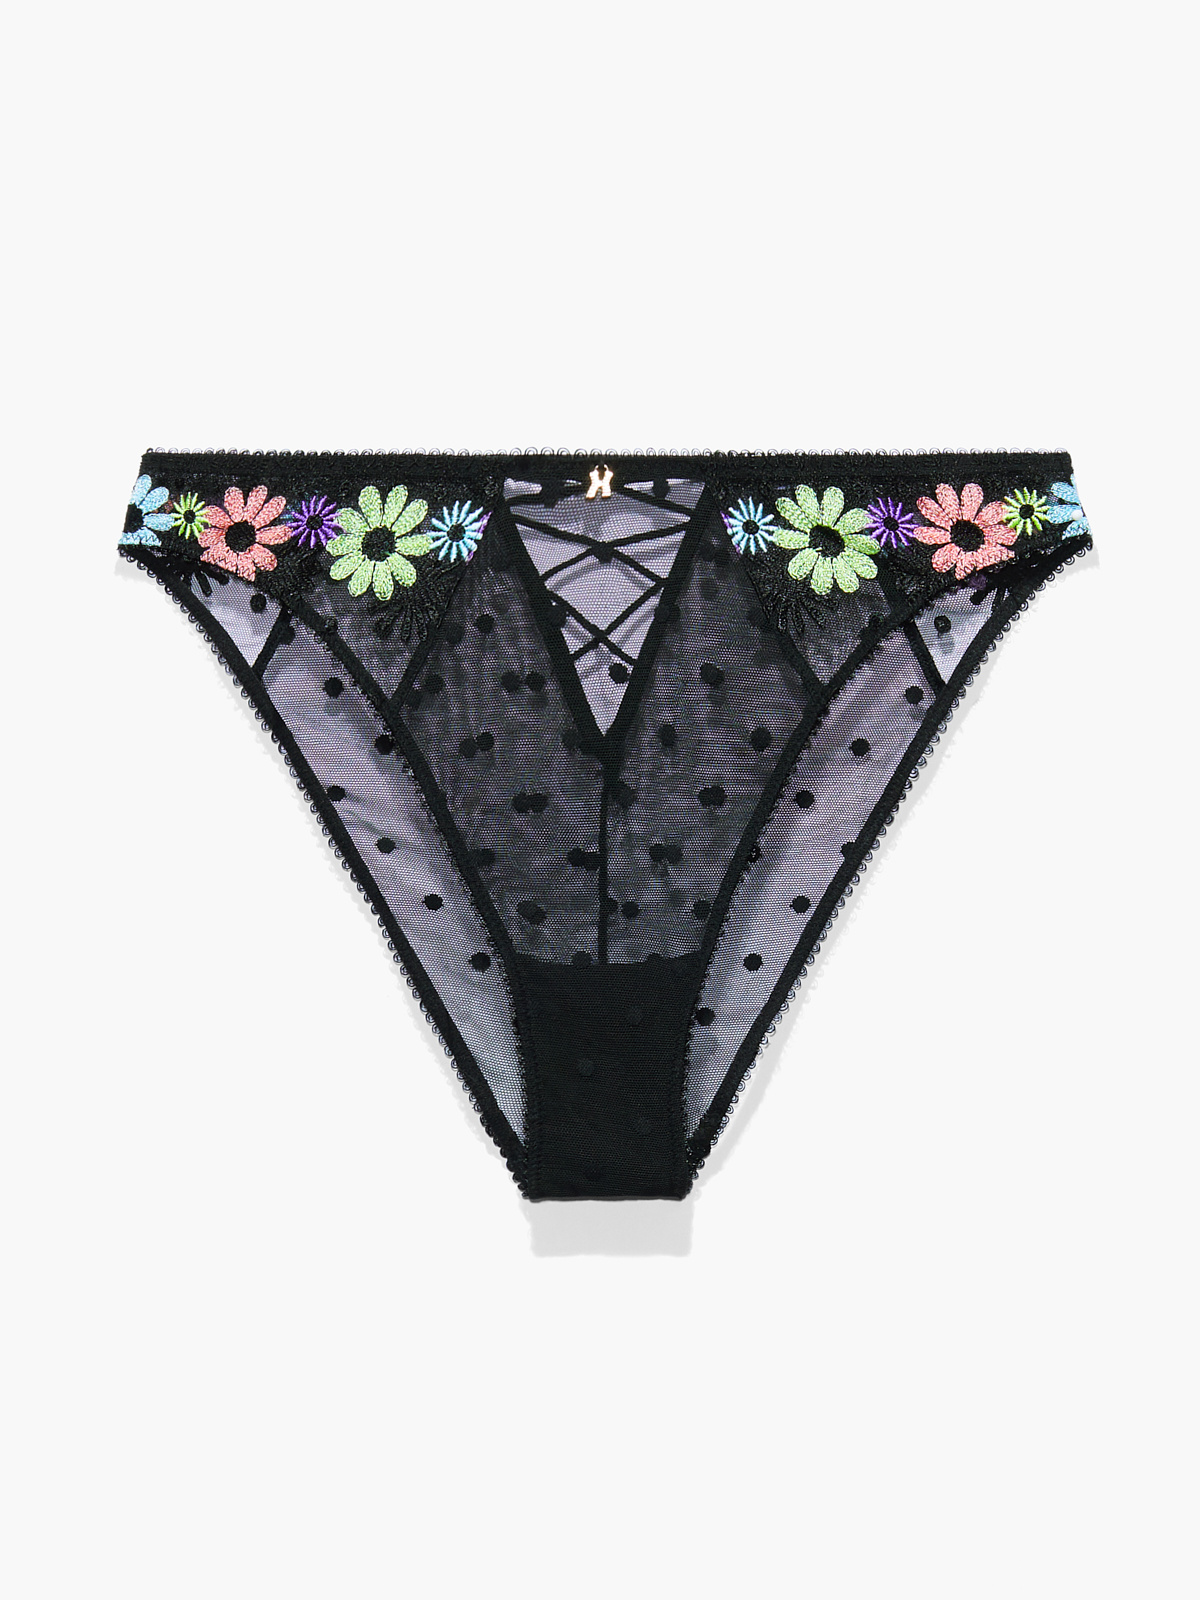 Free Spirit Floral Embroidery Unlined Balconette Bra